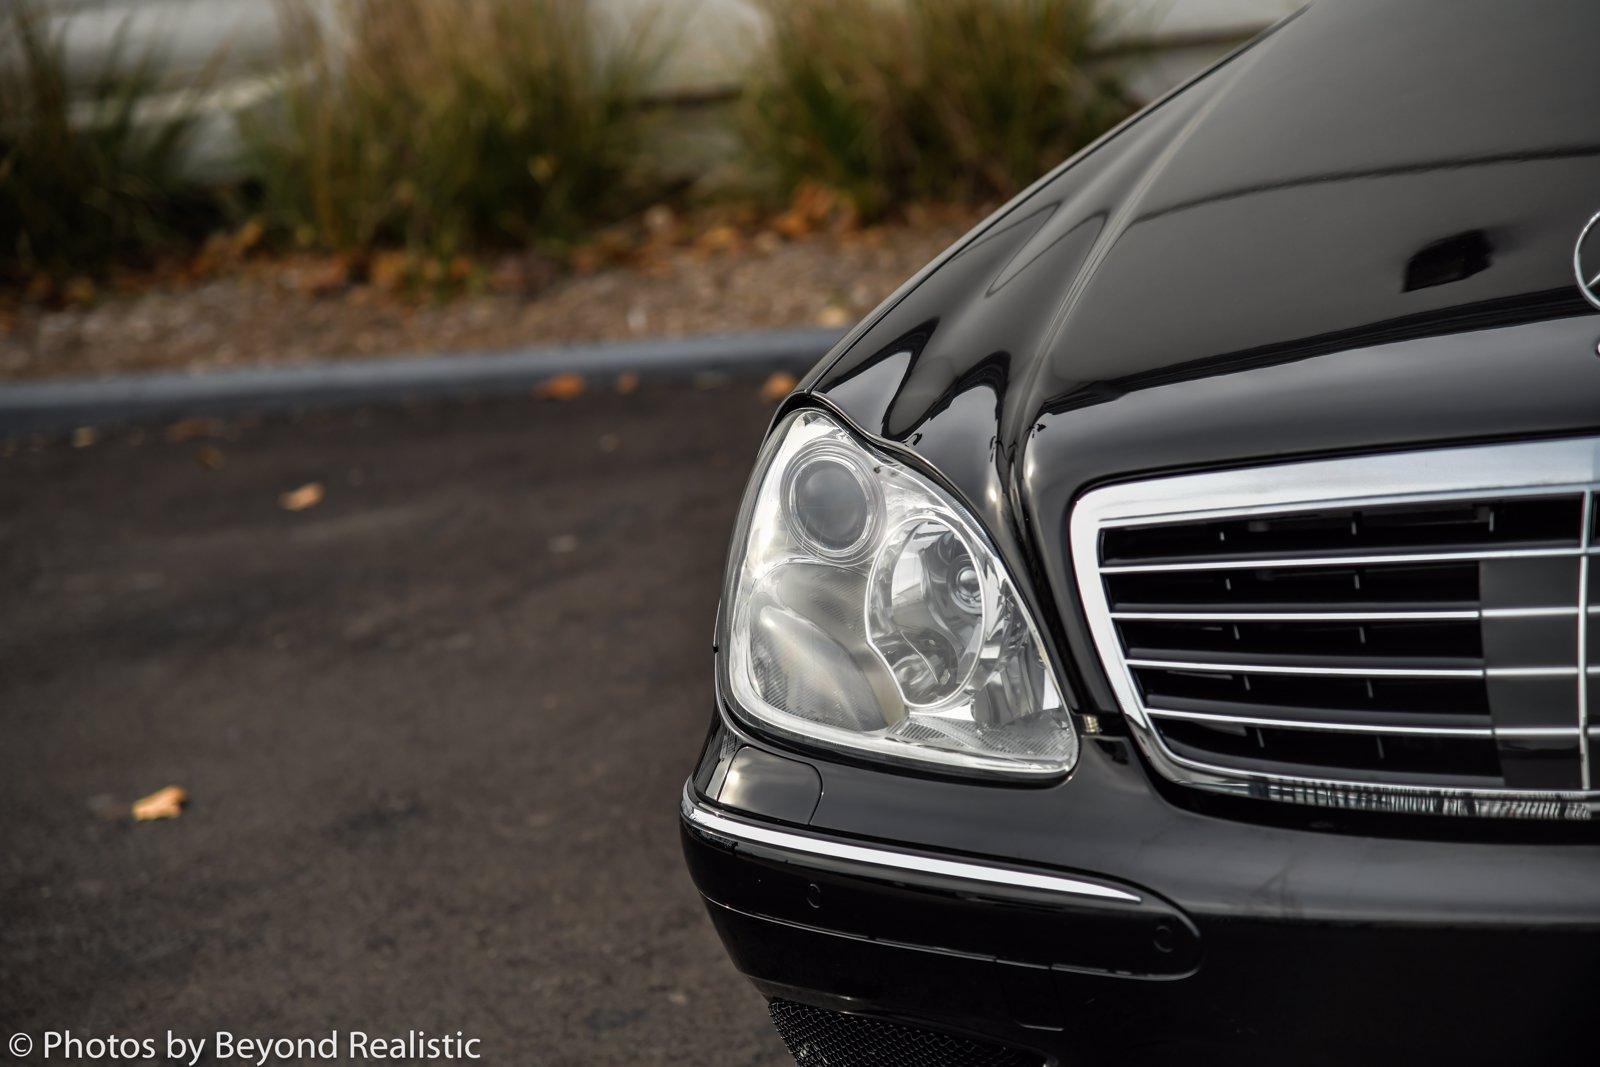 Used 2006 Mercedes-Benz S-Class S65  AMG | Downers Grove, IL